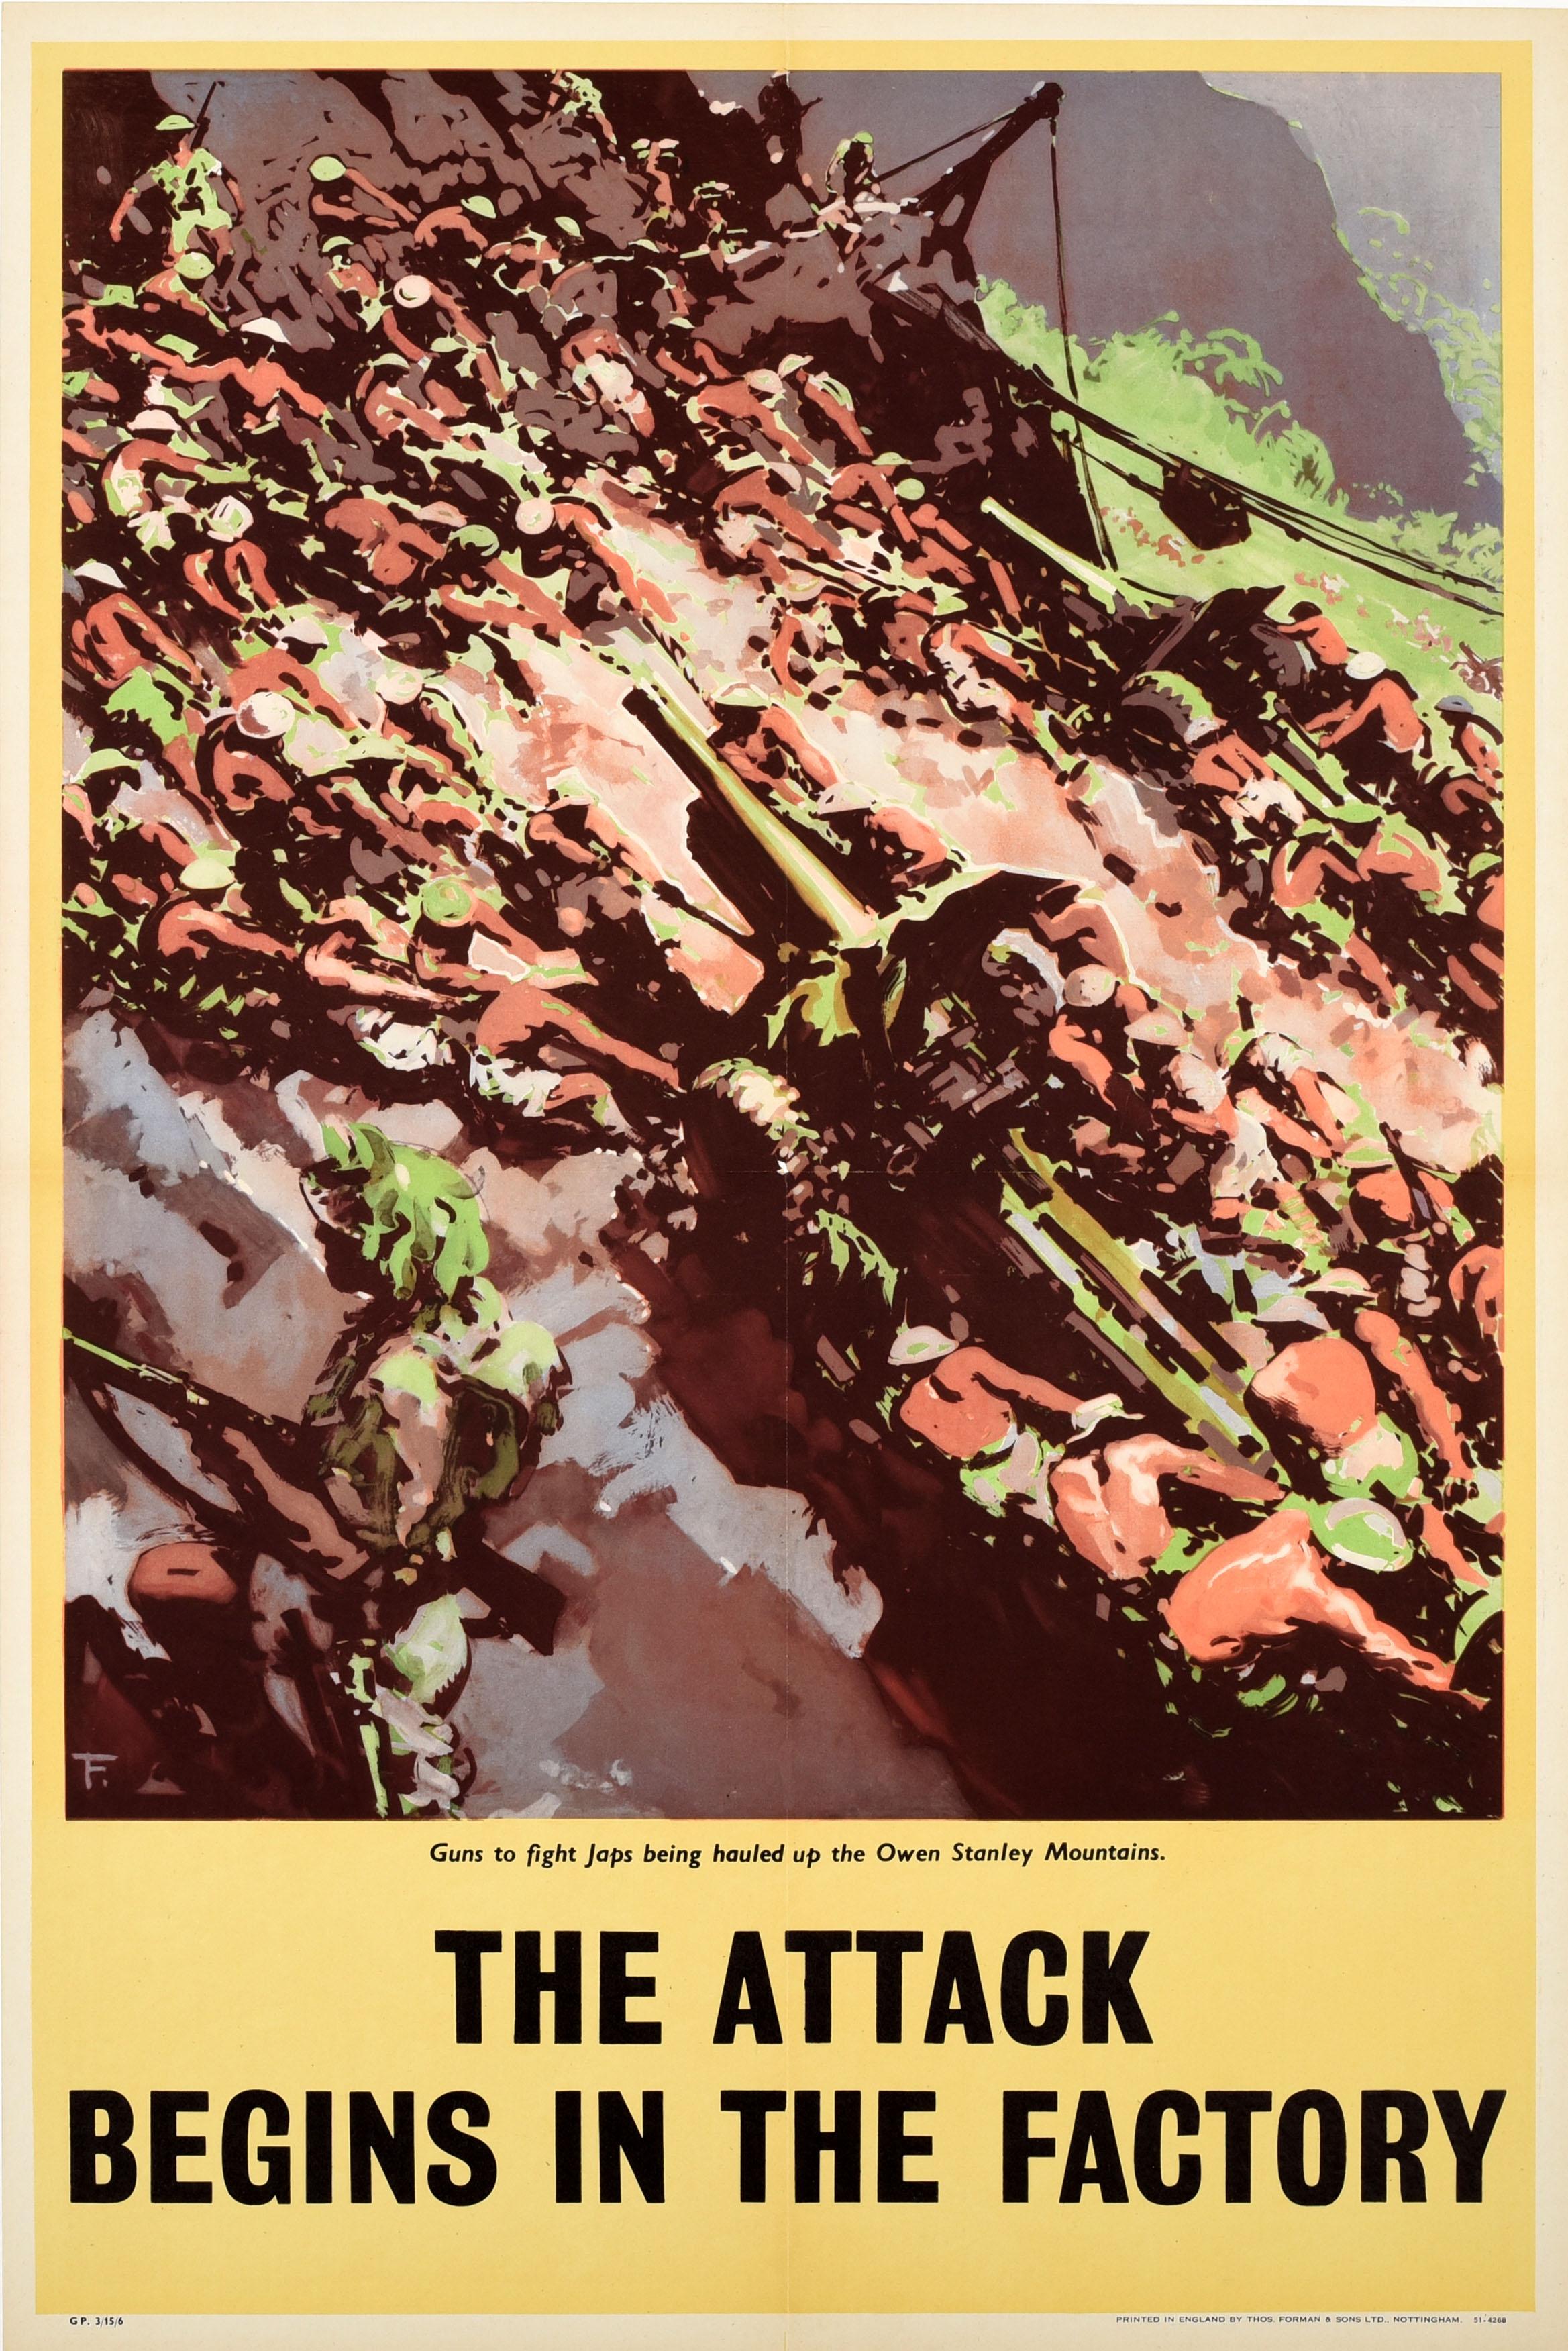 Harold Forster Print - Original Vintage WWII Poster Attack Factory Owen Stanley Mountains Pacific War